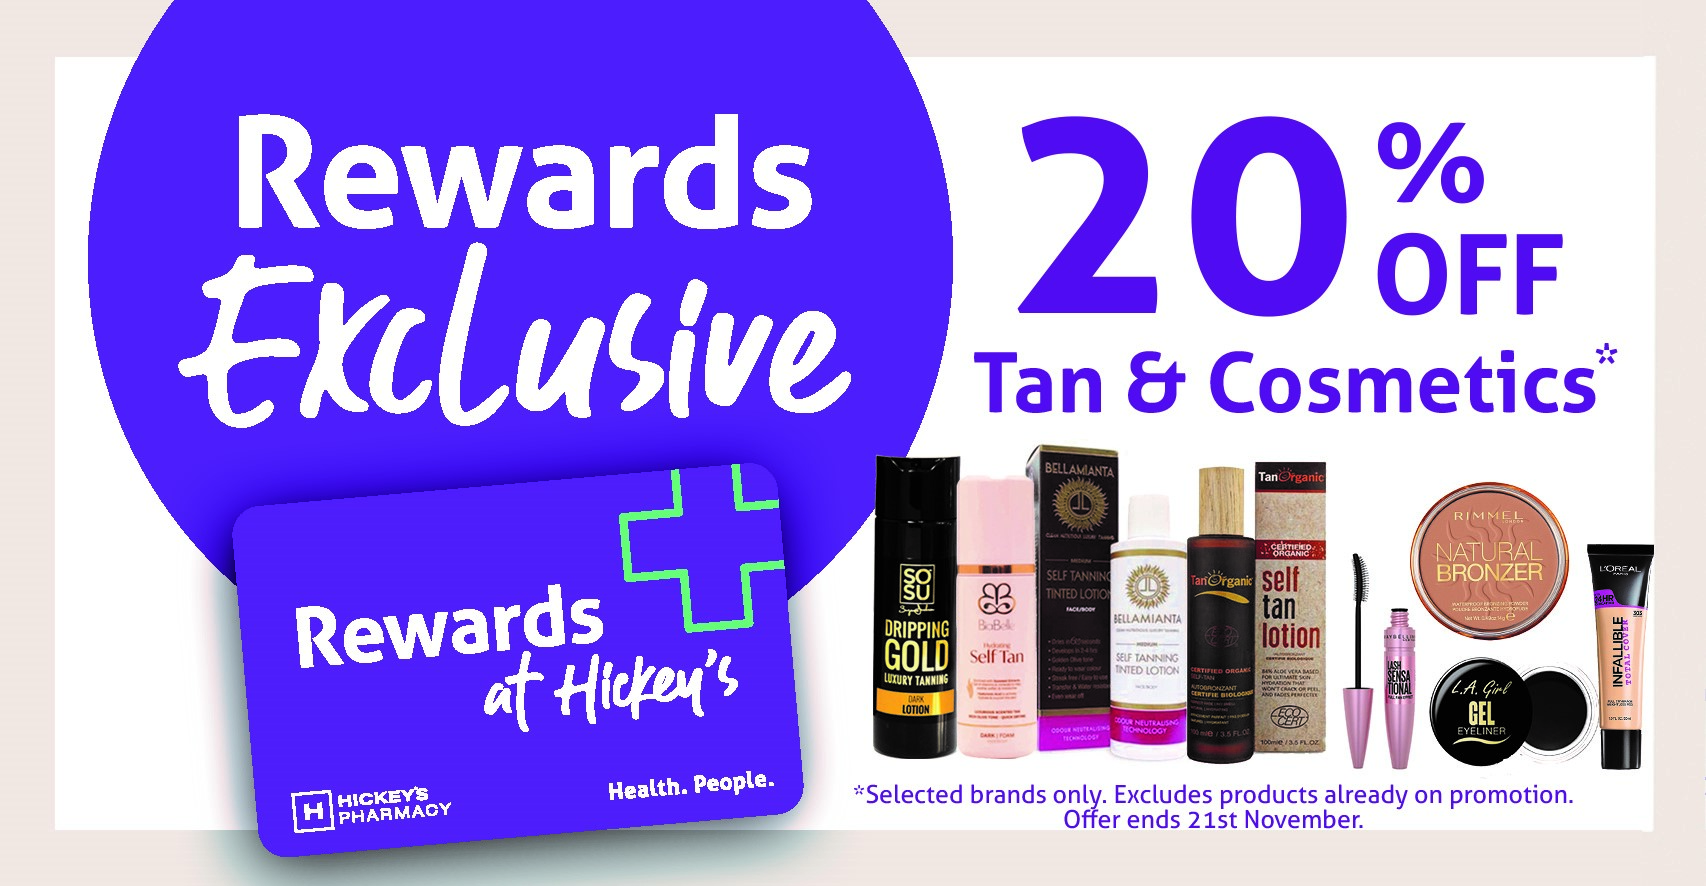 Rewards at Hickey’s Exclusive offer!